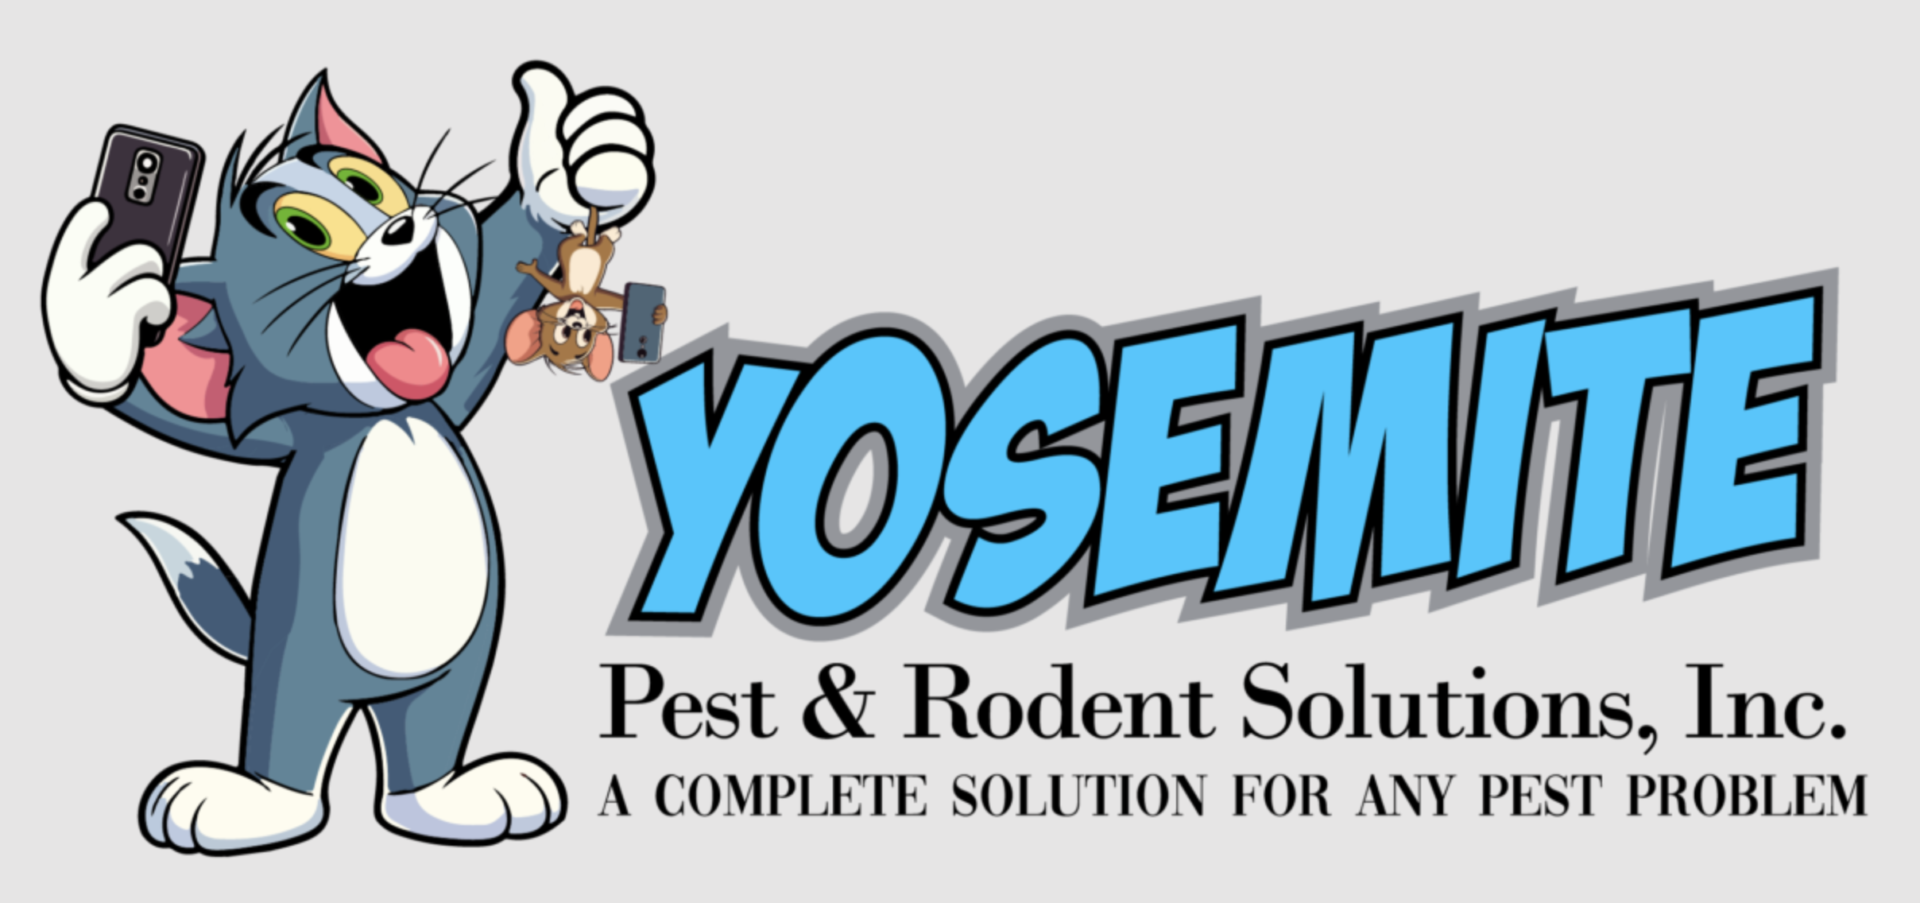 yosemite-pest-rodent-solutions